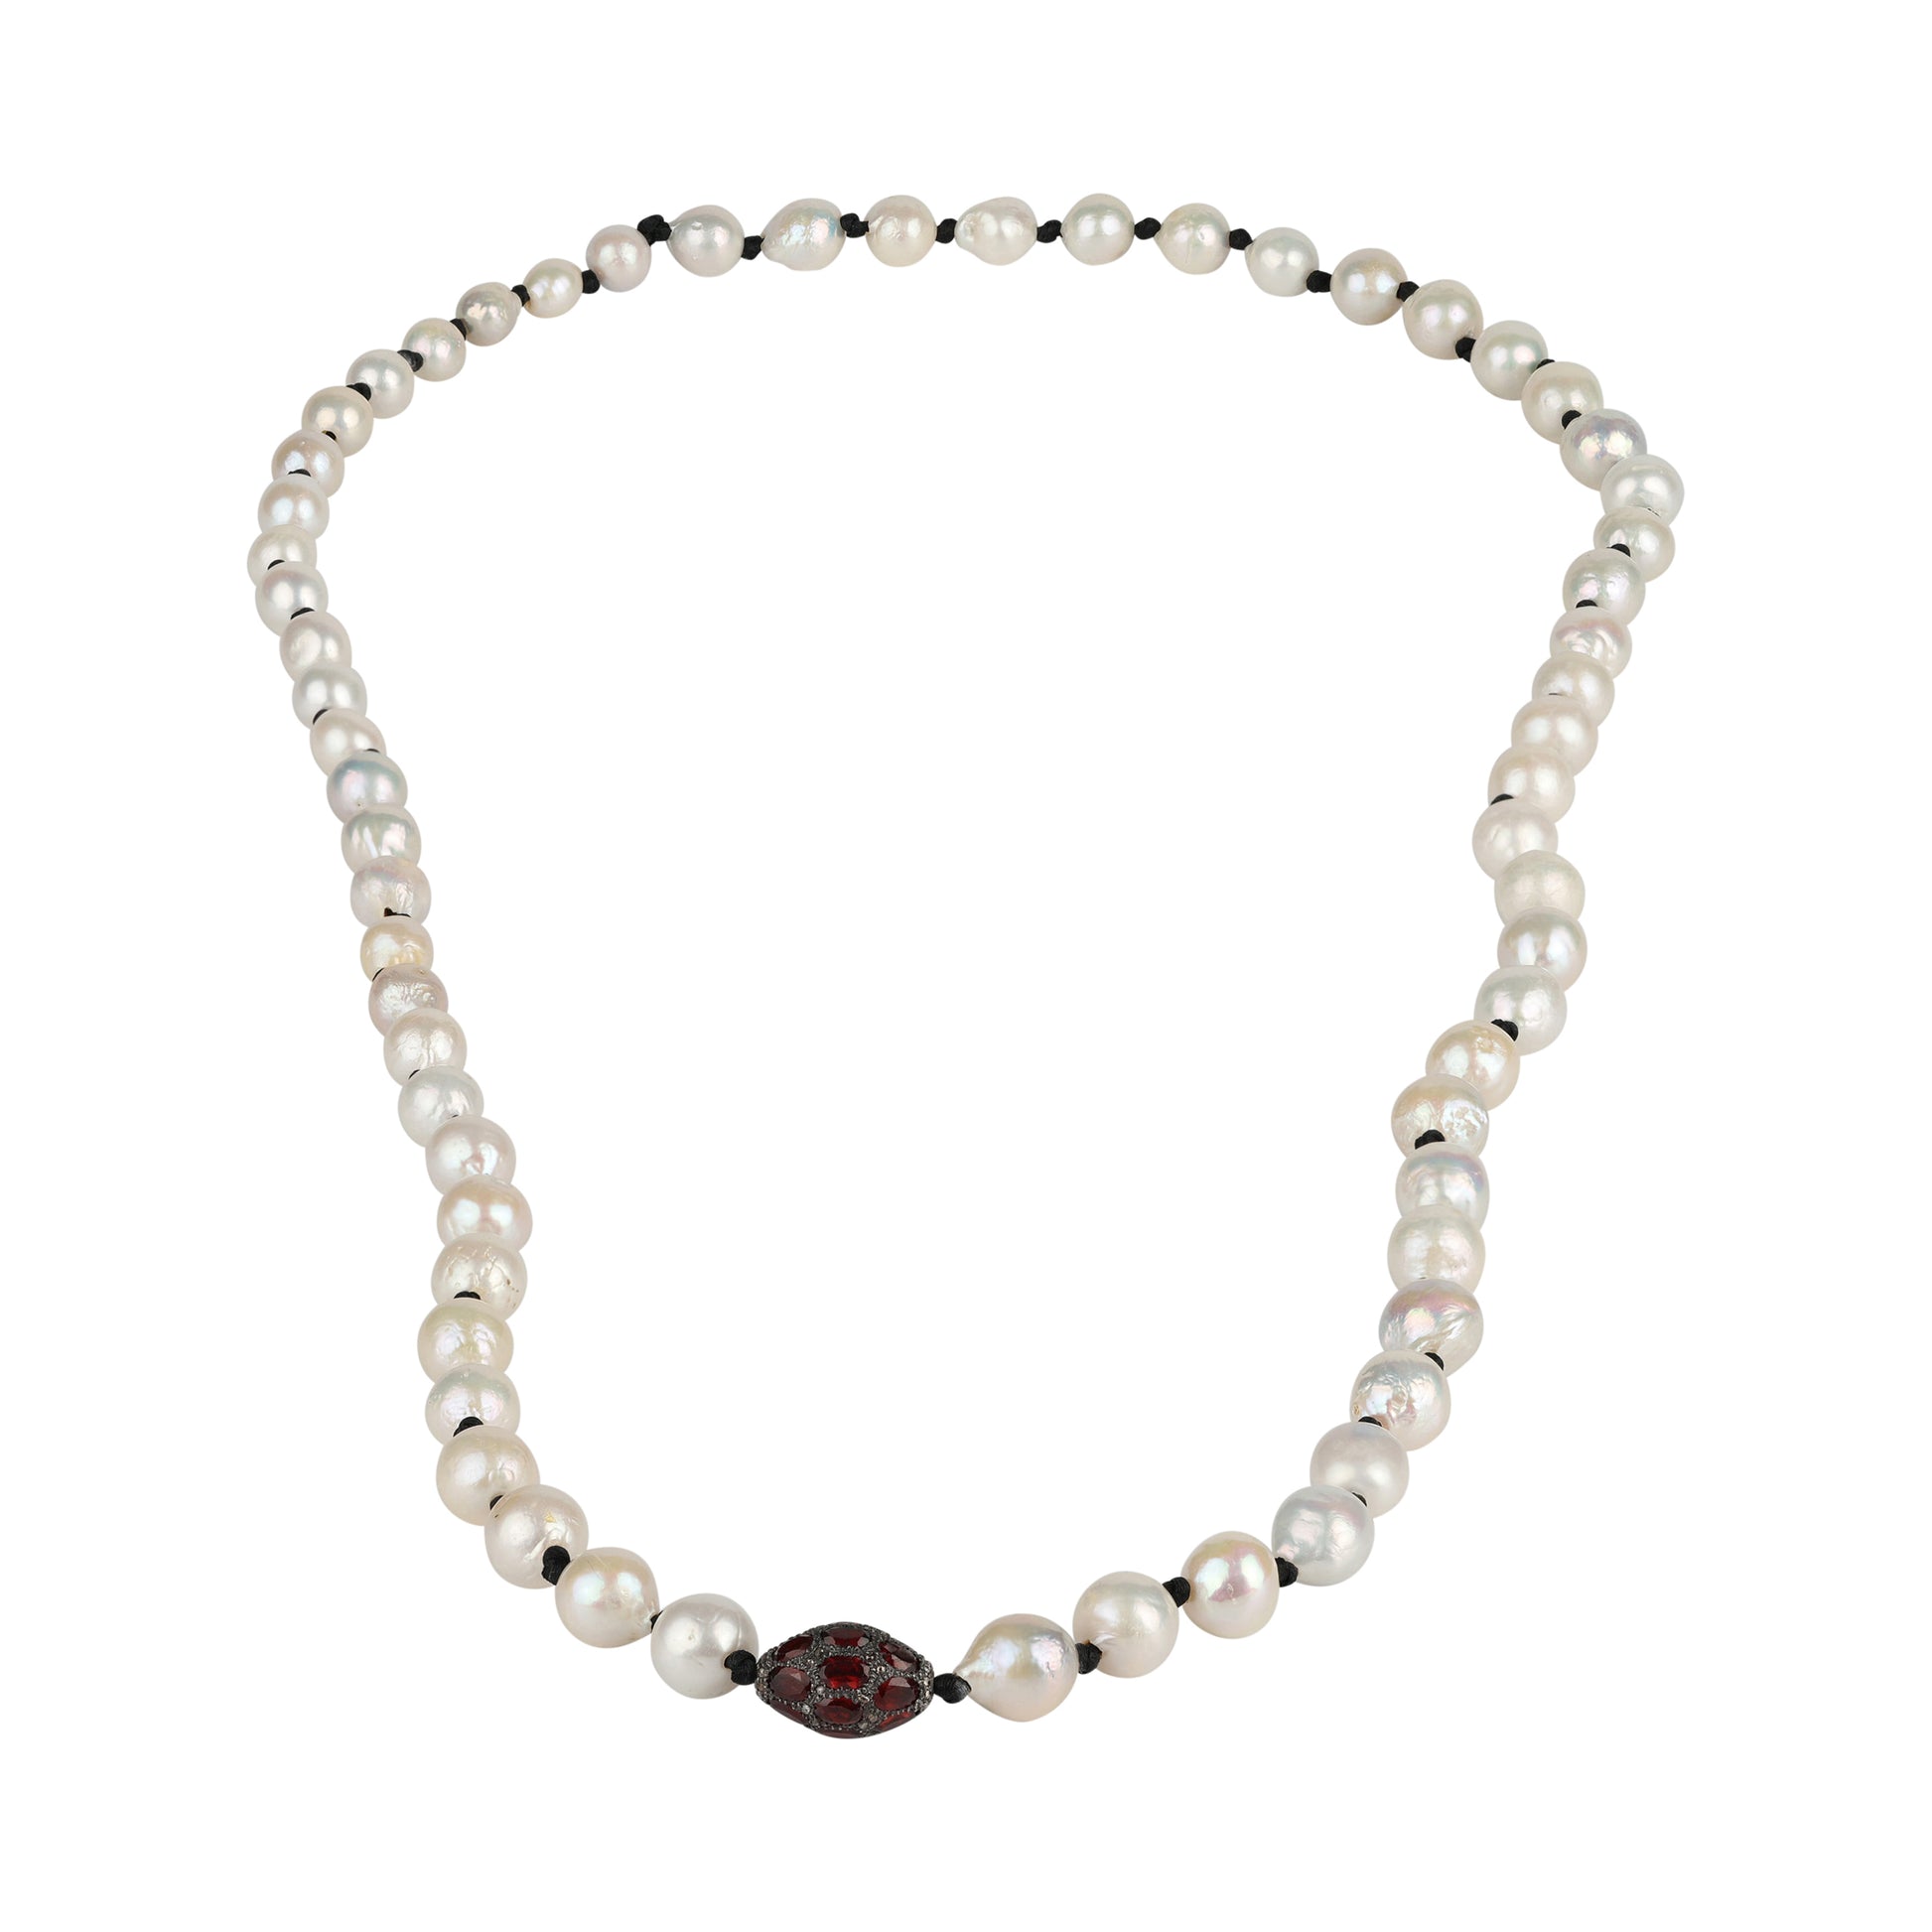 Elegant baroque pearls necklace with a garnets and diamonds ball